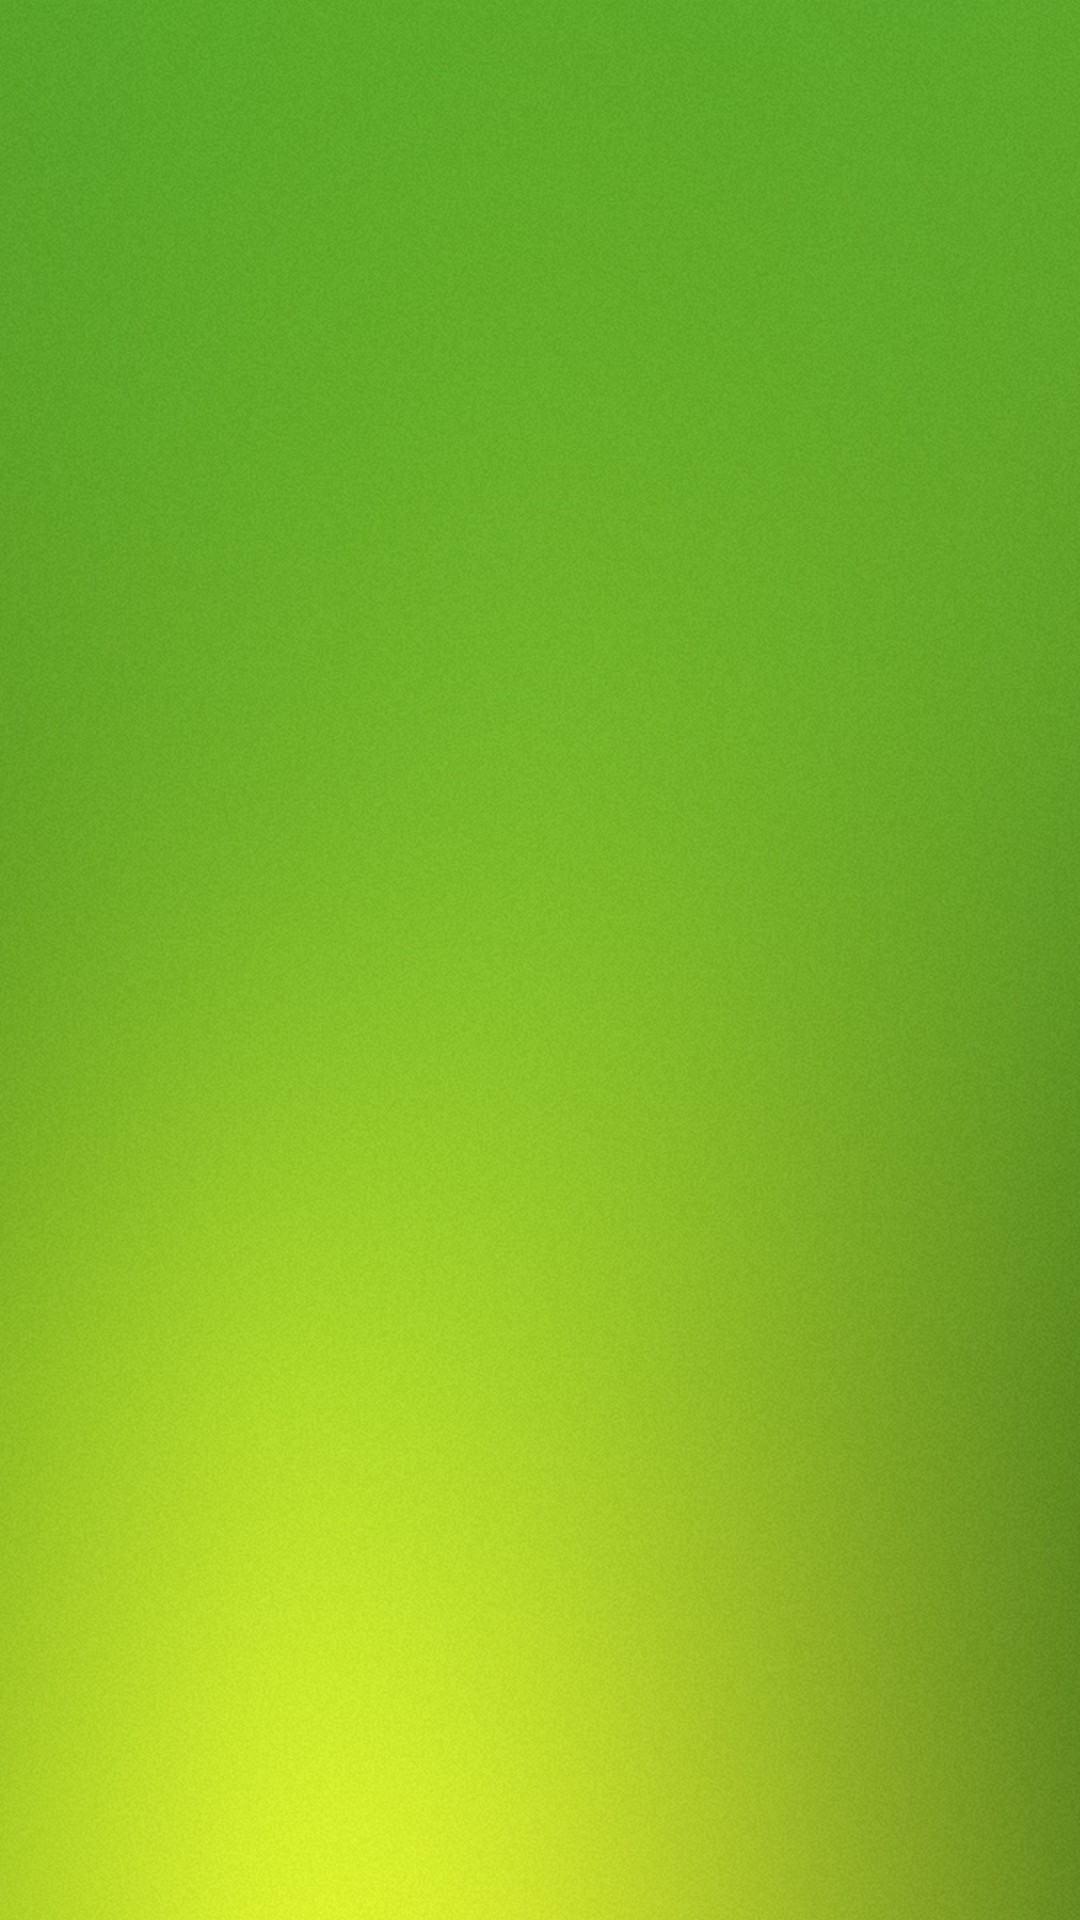 Lime Green Wallpaper Android with resolution 1080X1920 pixel. You can make this wallpaper for your Android backgrounds, Tablet, Smartphones Screensavers and Mobile Phone Lock Screen